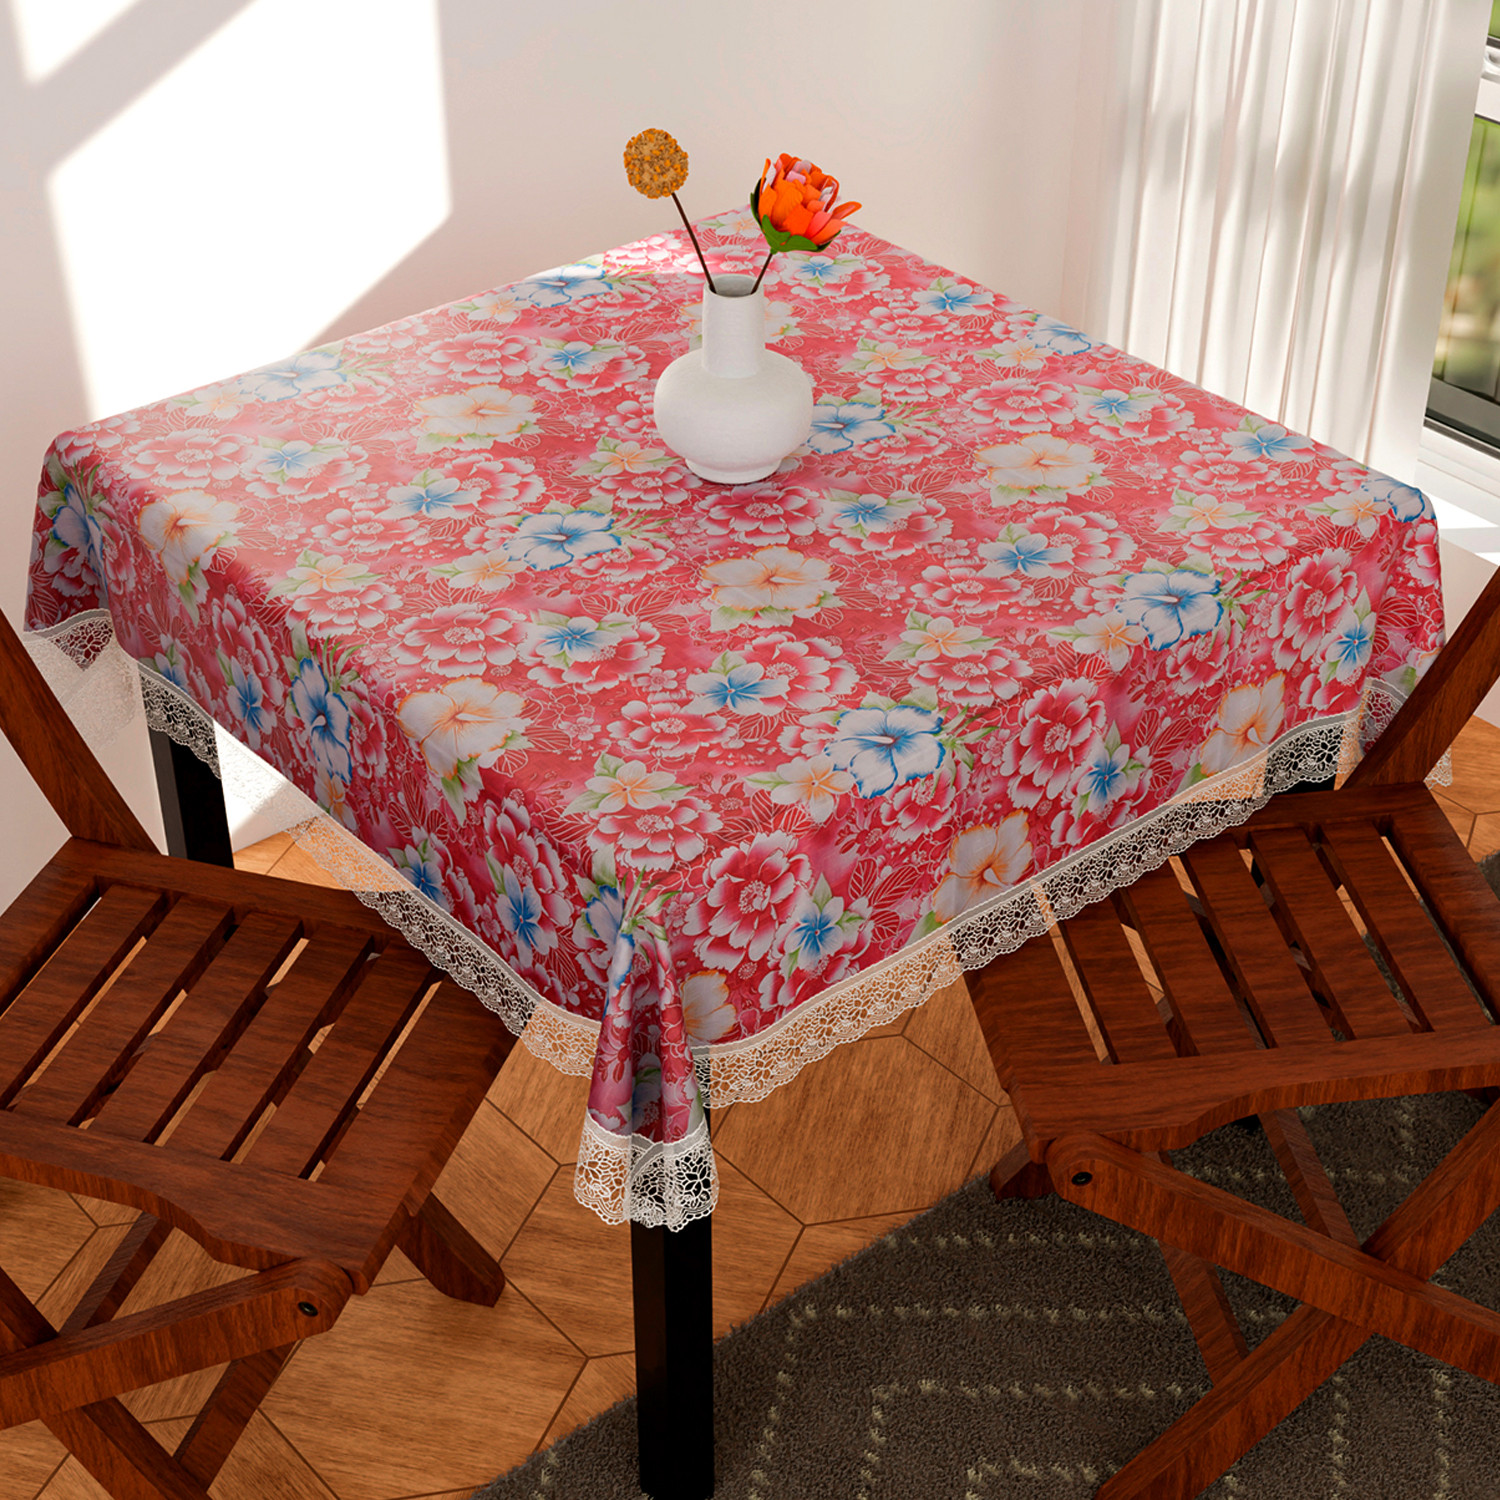 Kuber Industries Square Table Cover for 4 Seater|PVC Waterproof Flower Pattern Tablecloth Indoor & Outdoor|48x48 Inch (Pink)